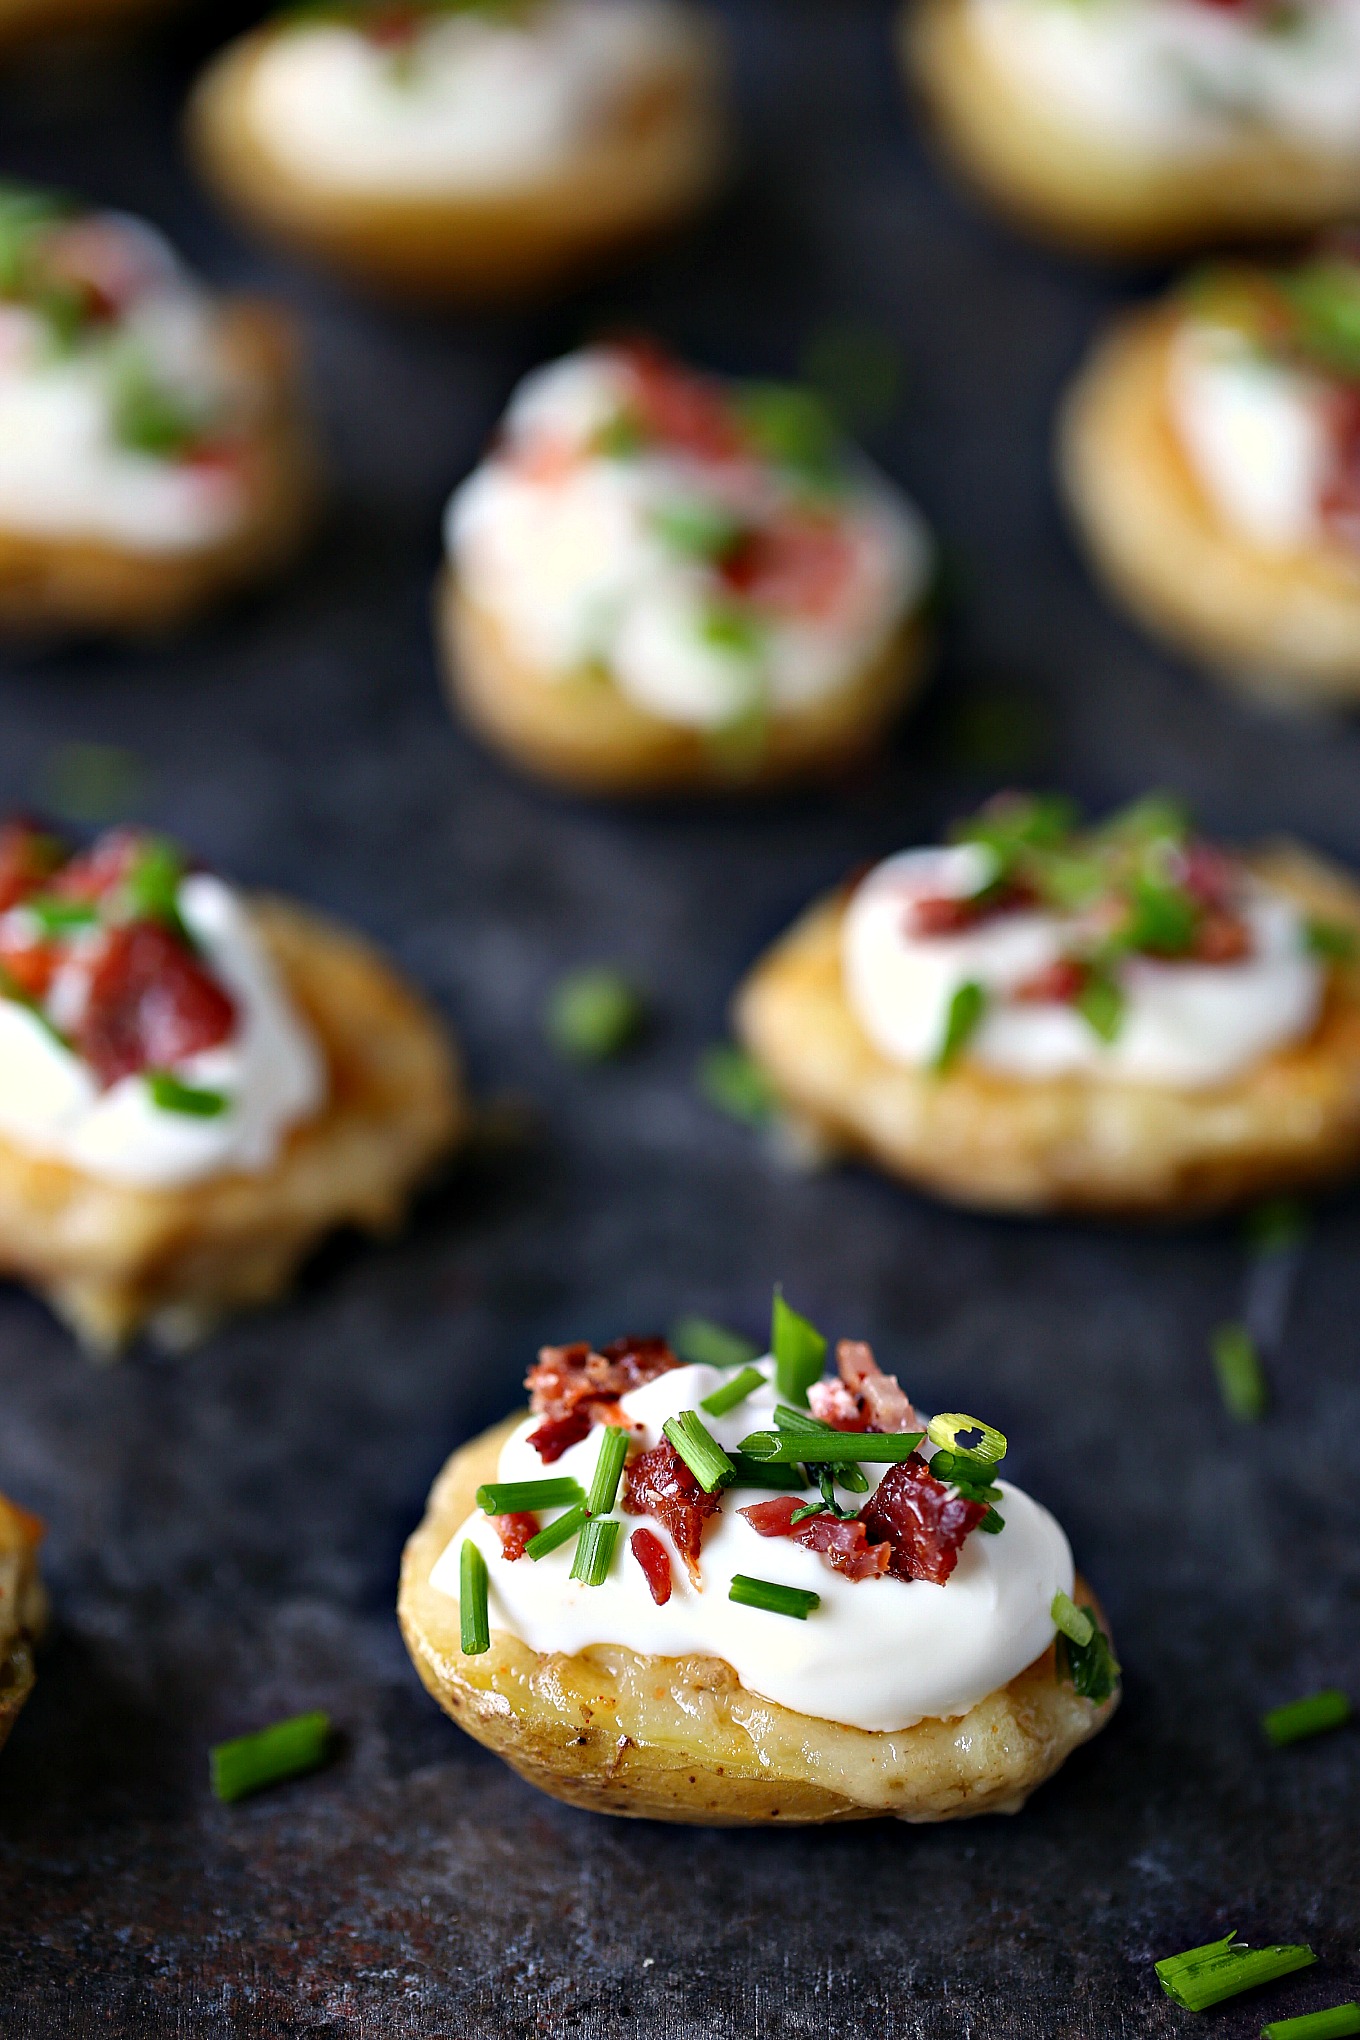 Mini Potato Skins with Sour Cream, Bacon, and Chives from cravingsofalunatic.com- This recipe for Mini Potato Skins with Sour Cream, Bacon, and Chives is simple and delicious. These little bites are perfect for entertaining, especially during game season.